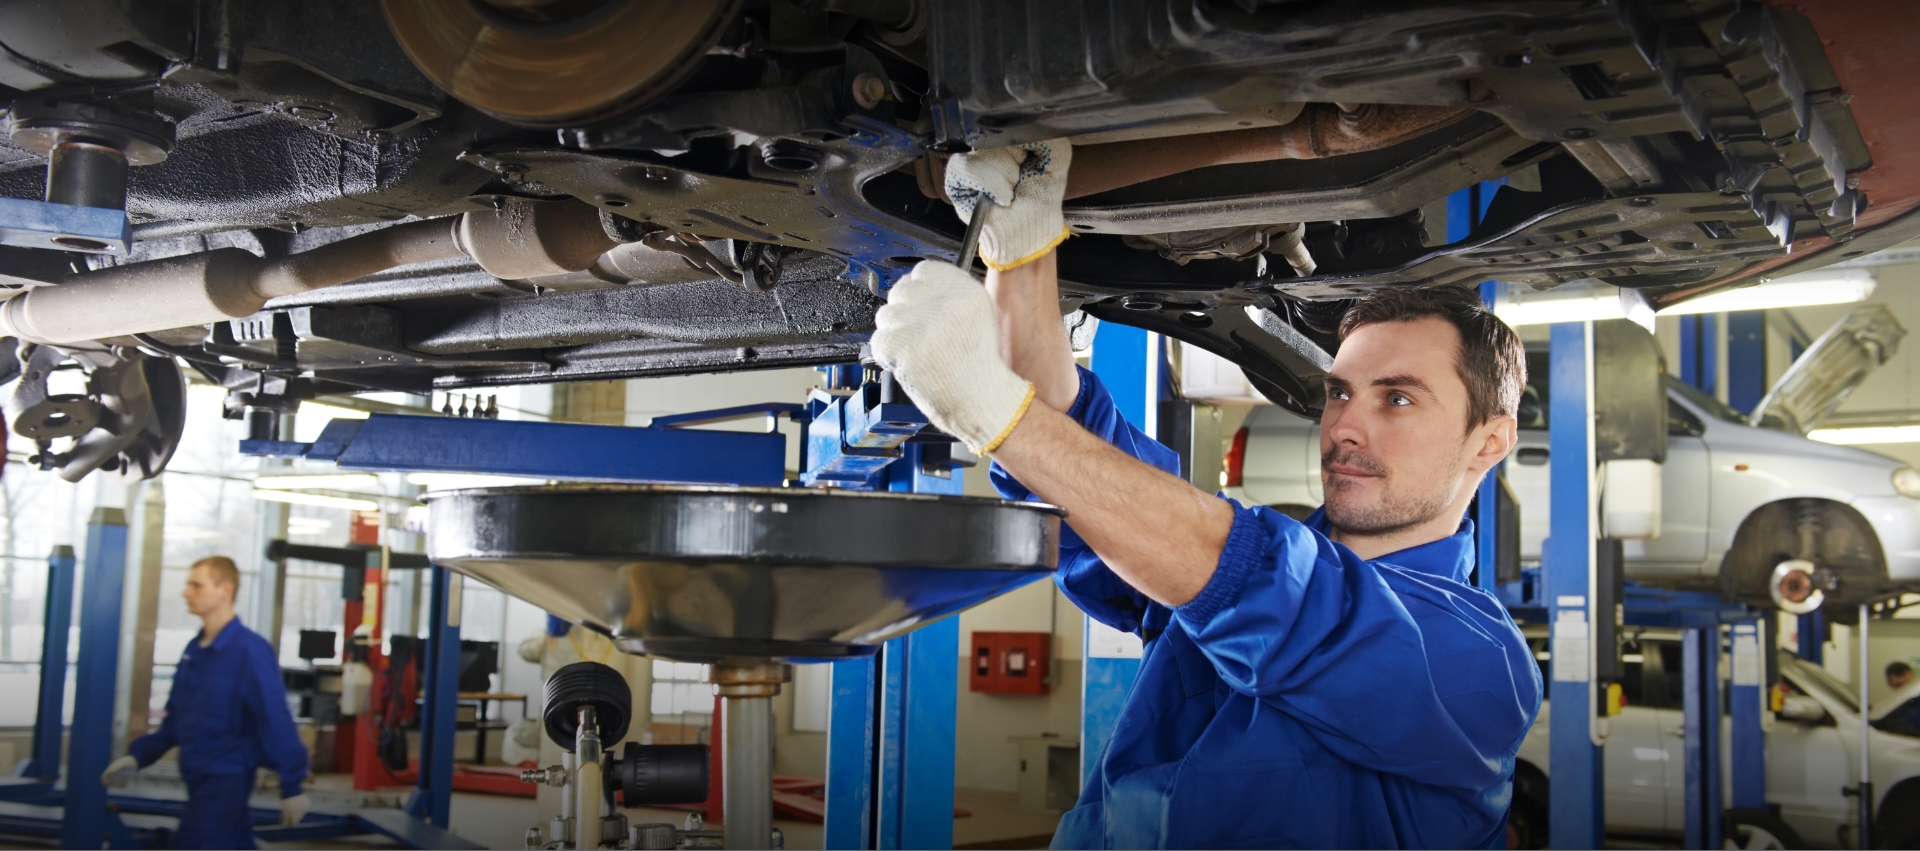 Auto Repair Fairview Heights Il